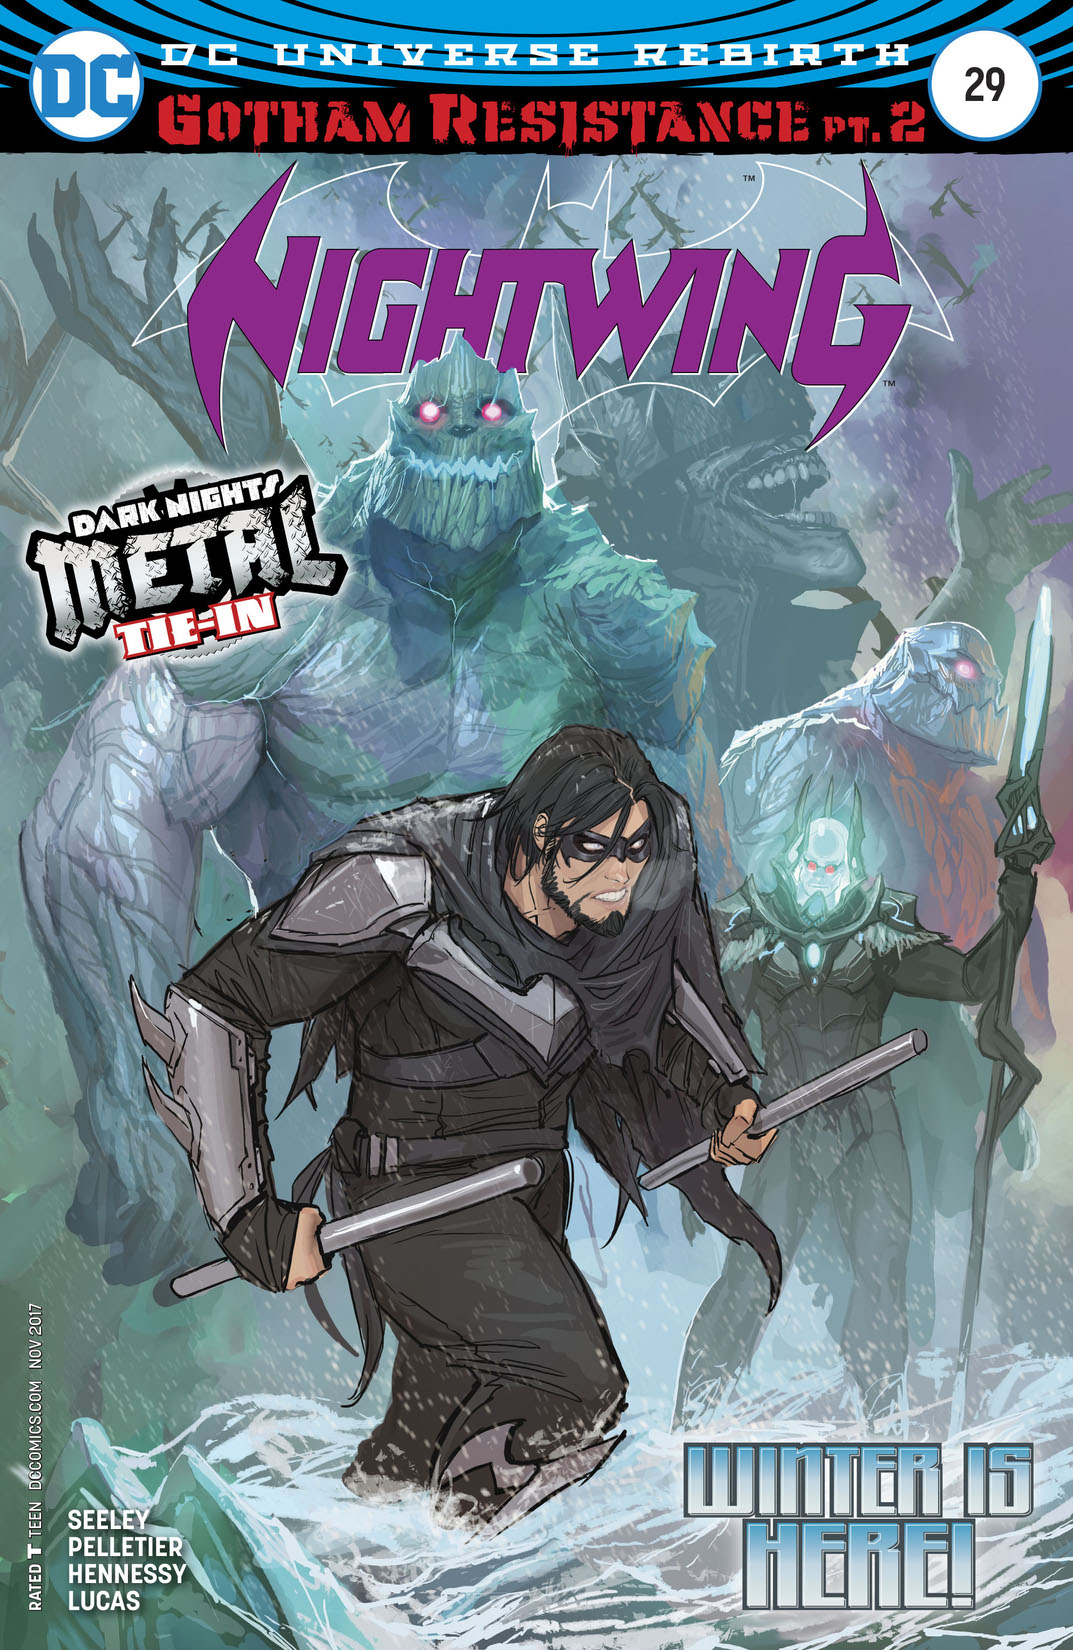 Nightwing (2016-) #29 preview images